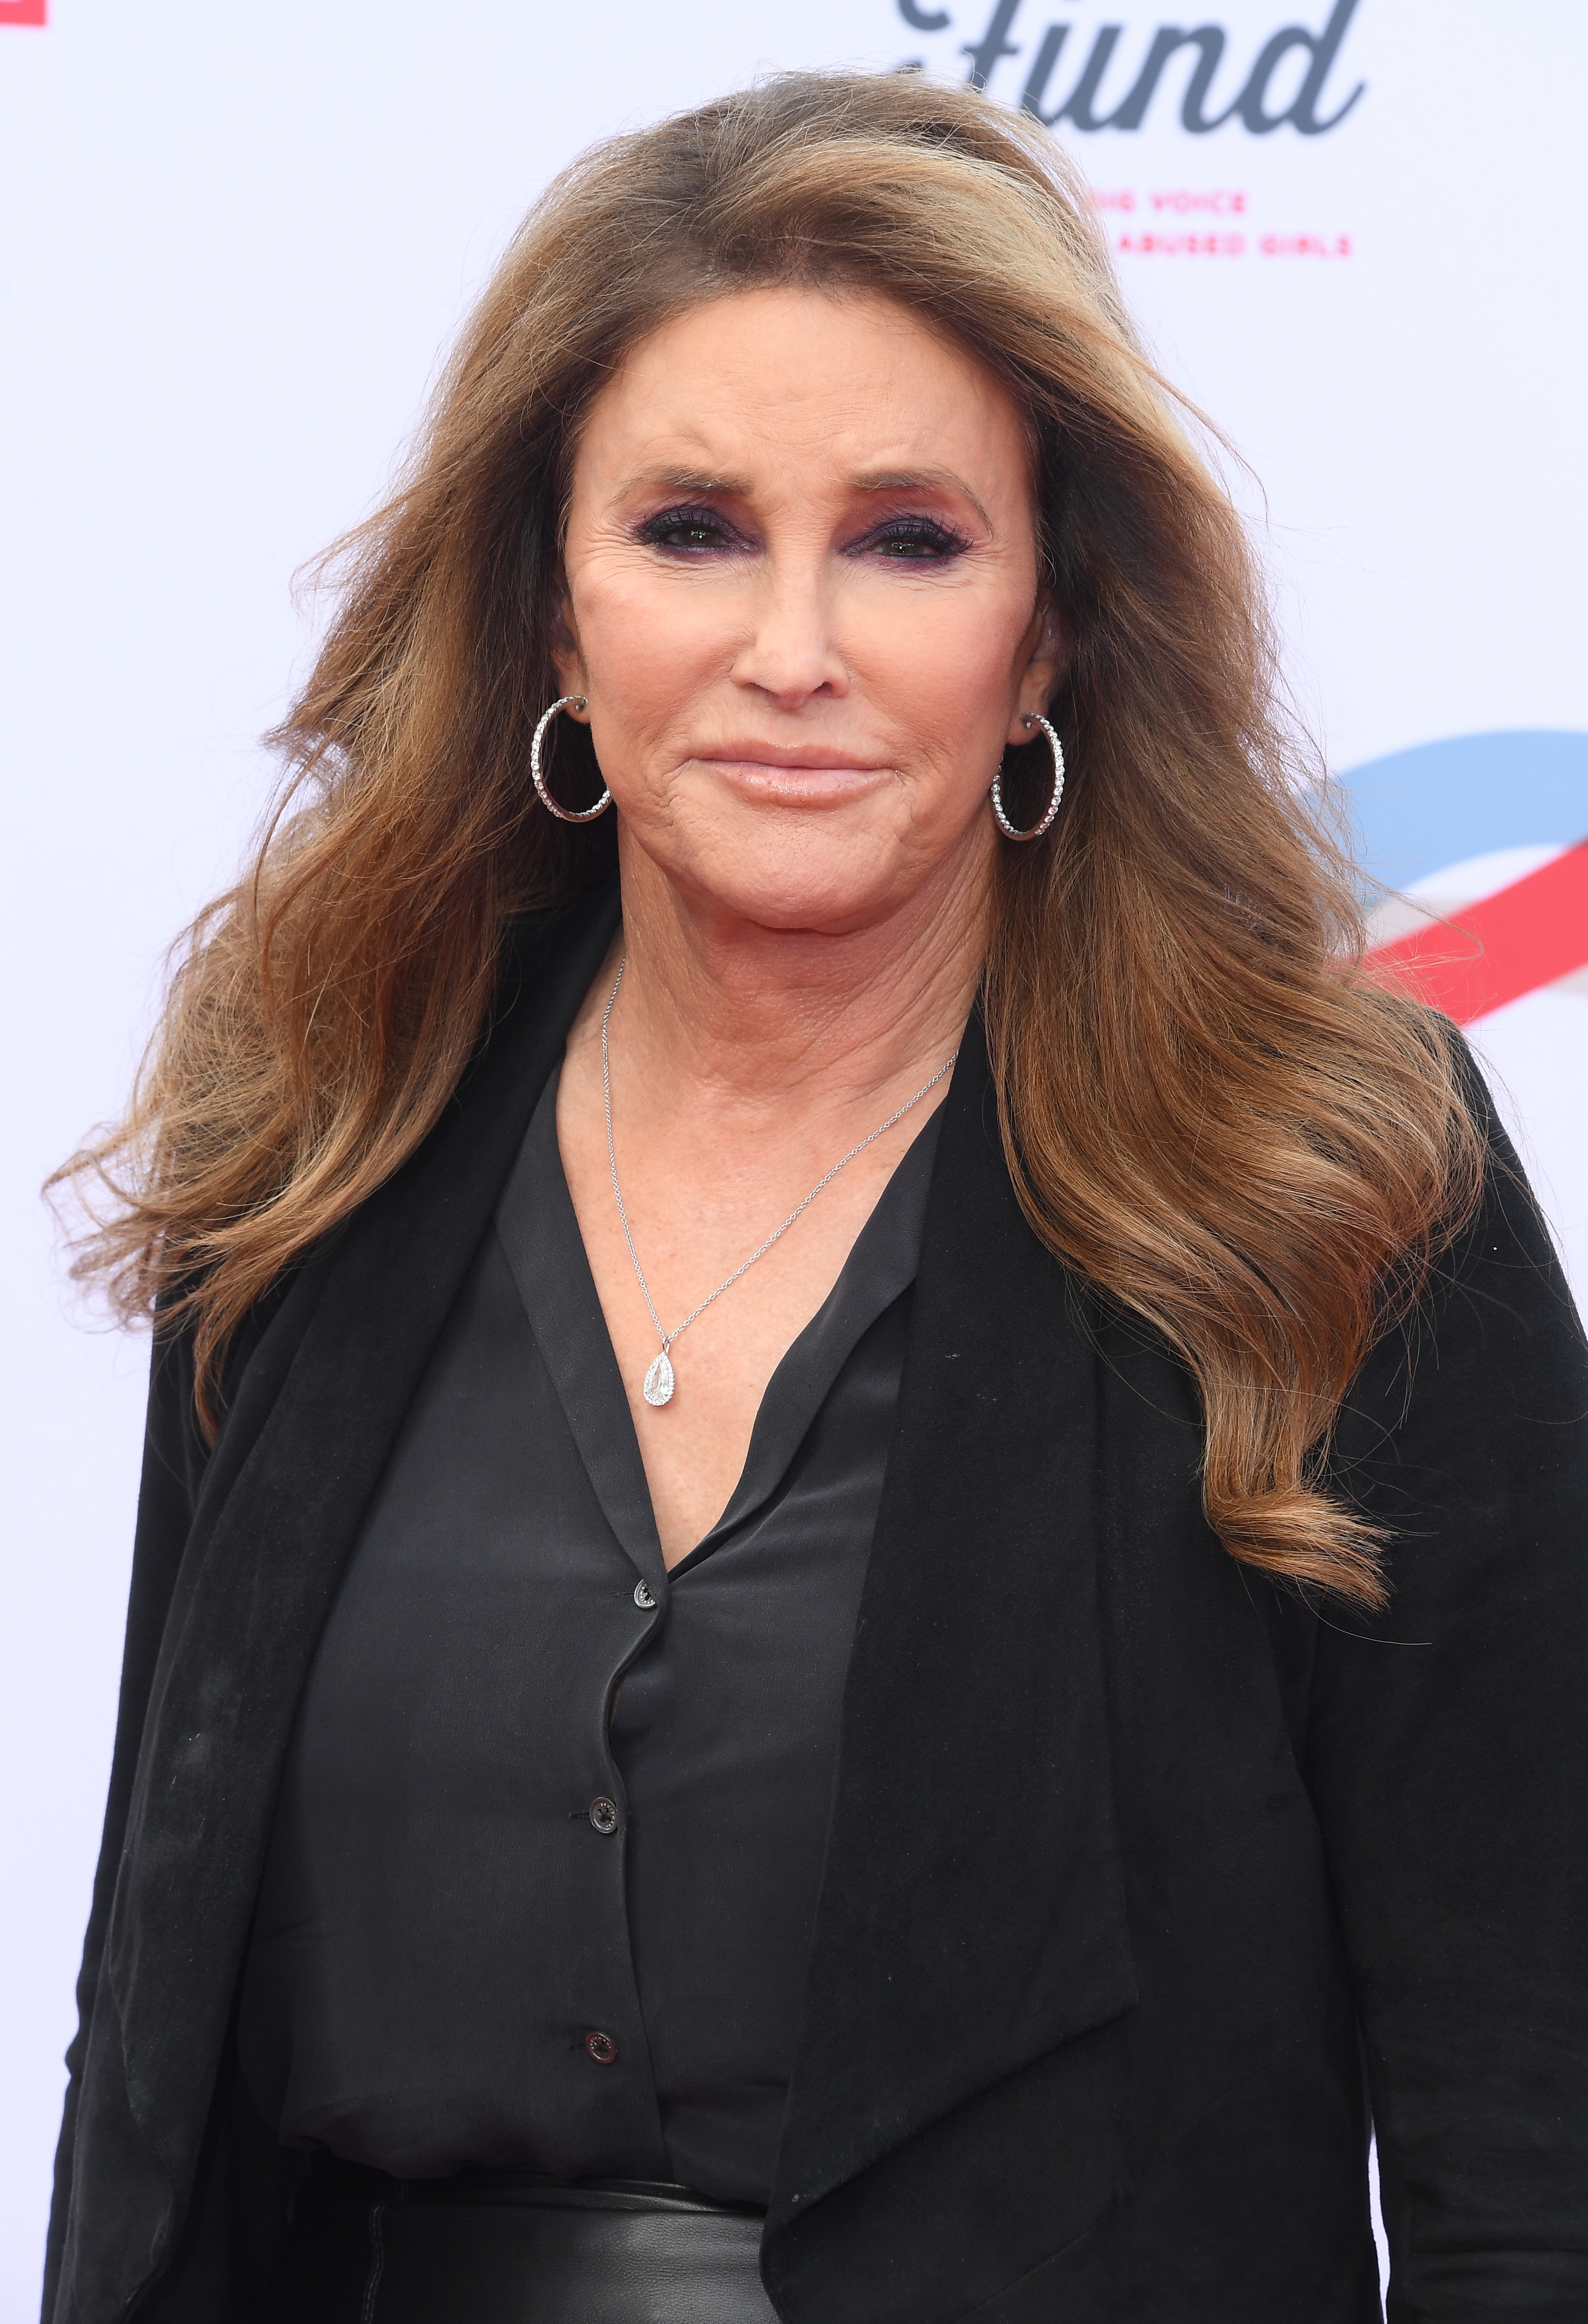 Caitlyn Jenner attends the 4th Annual GRAMMY Awards Viewing Party on April 3, 2022 in Los Angeles, California | Source: Getty Images